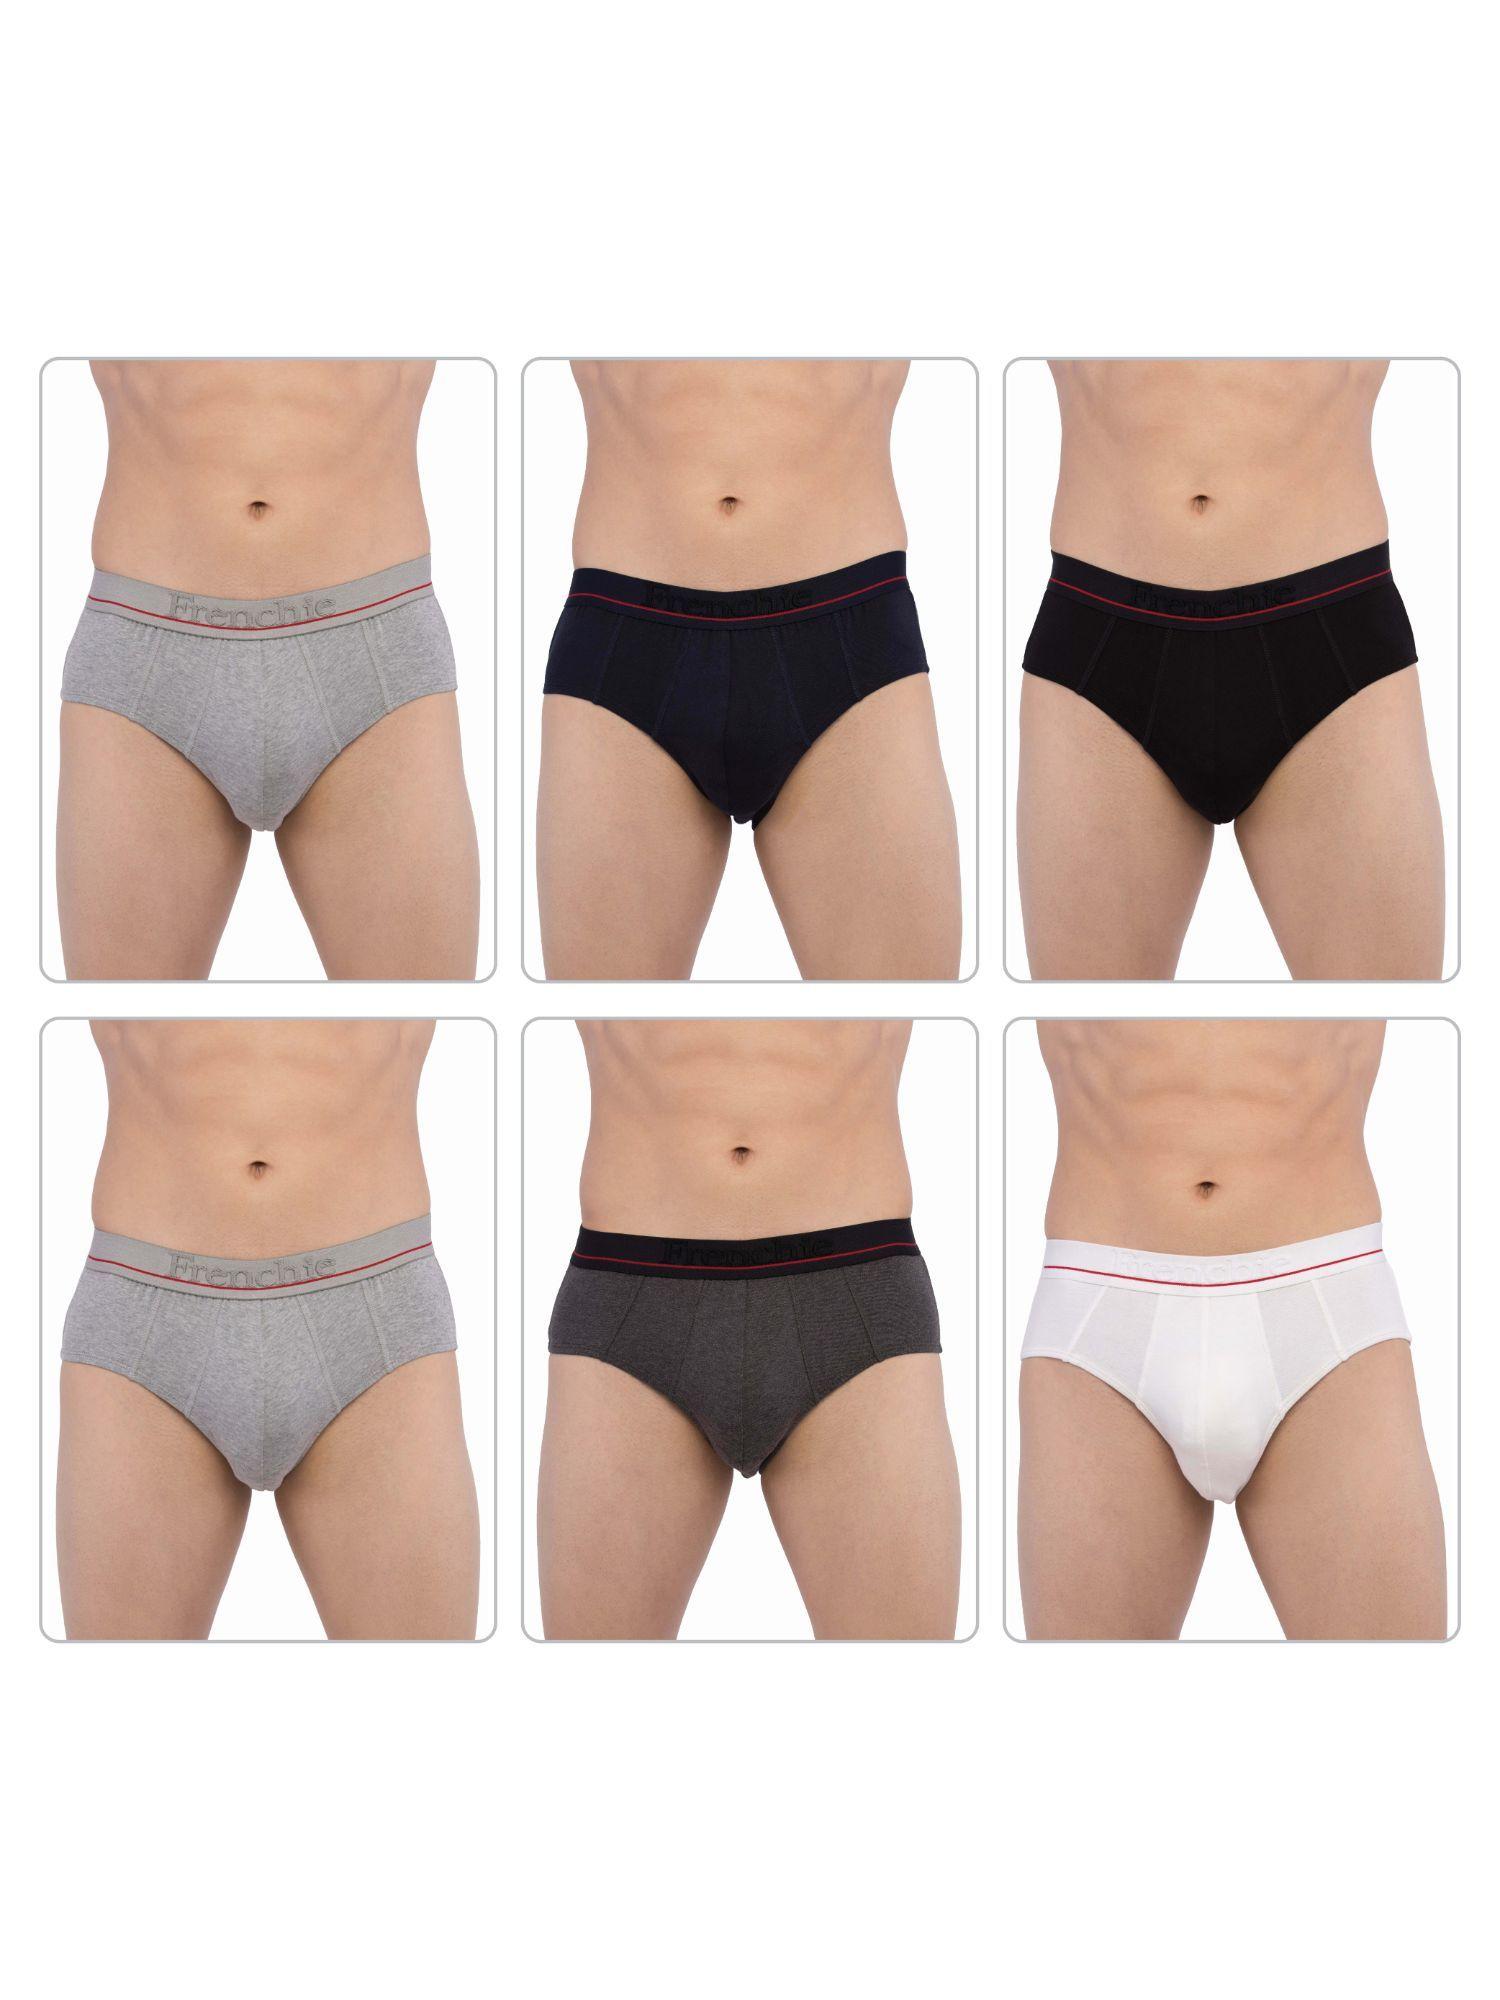 casuals 4003 mens cotton briefs assorted colours (pack of 6)